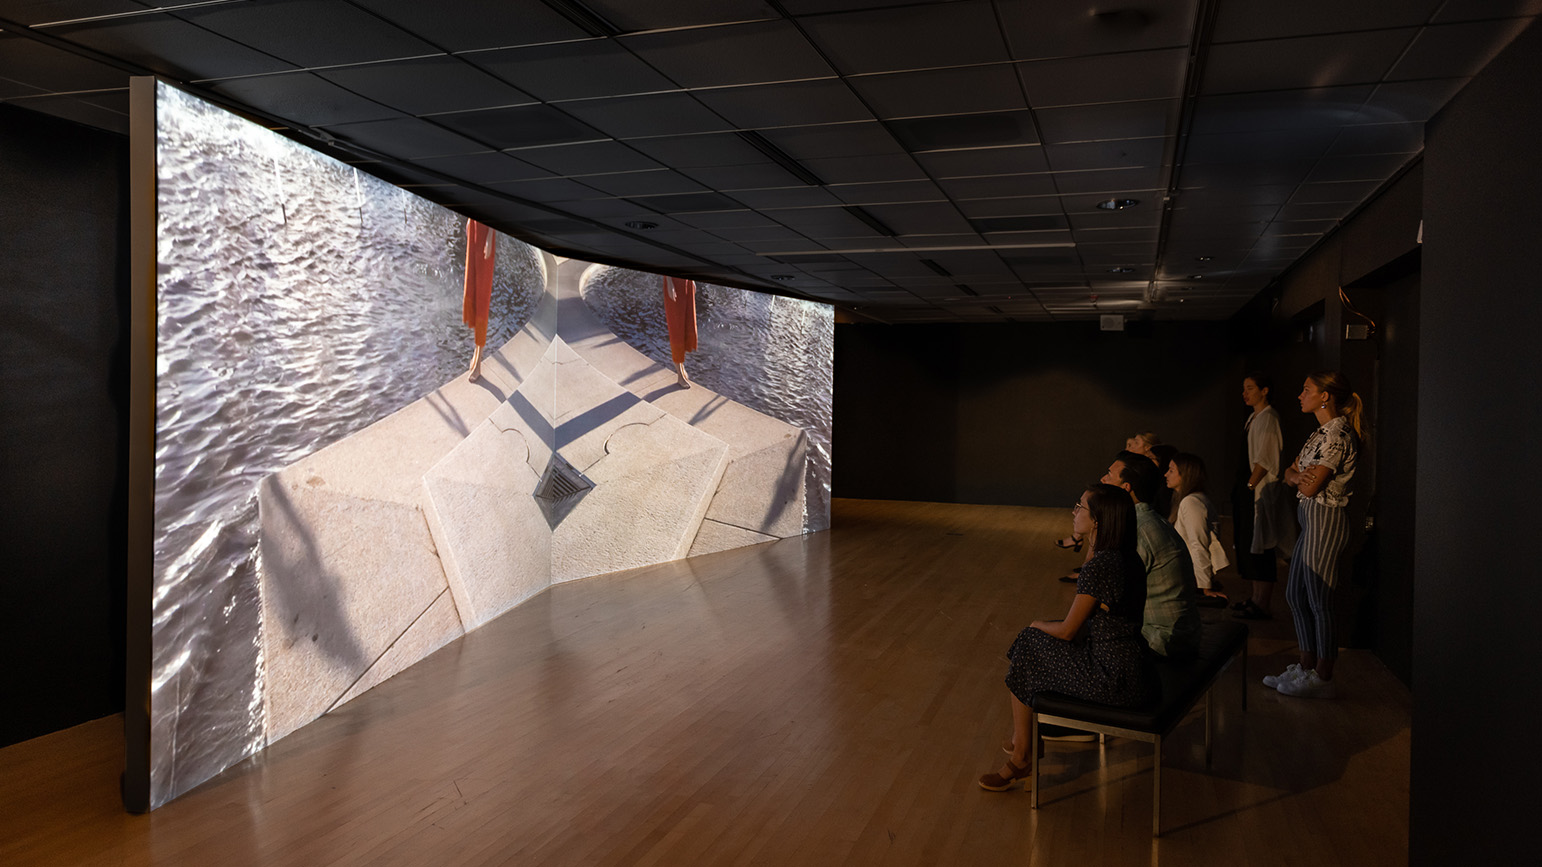 People in a gallery watching a projection on a massive screen